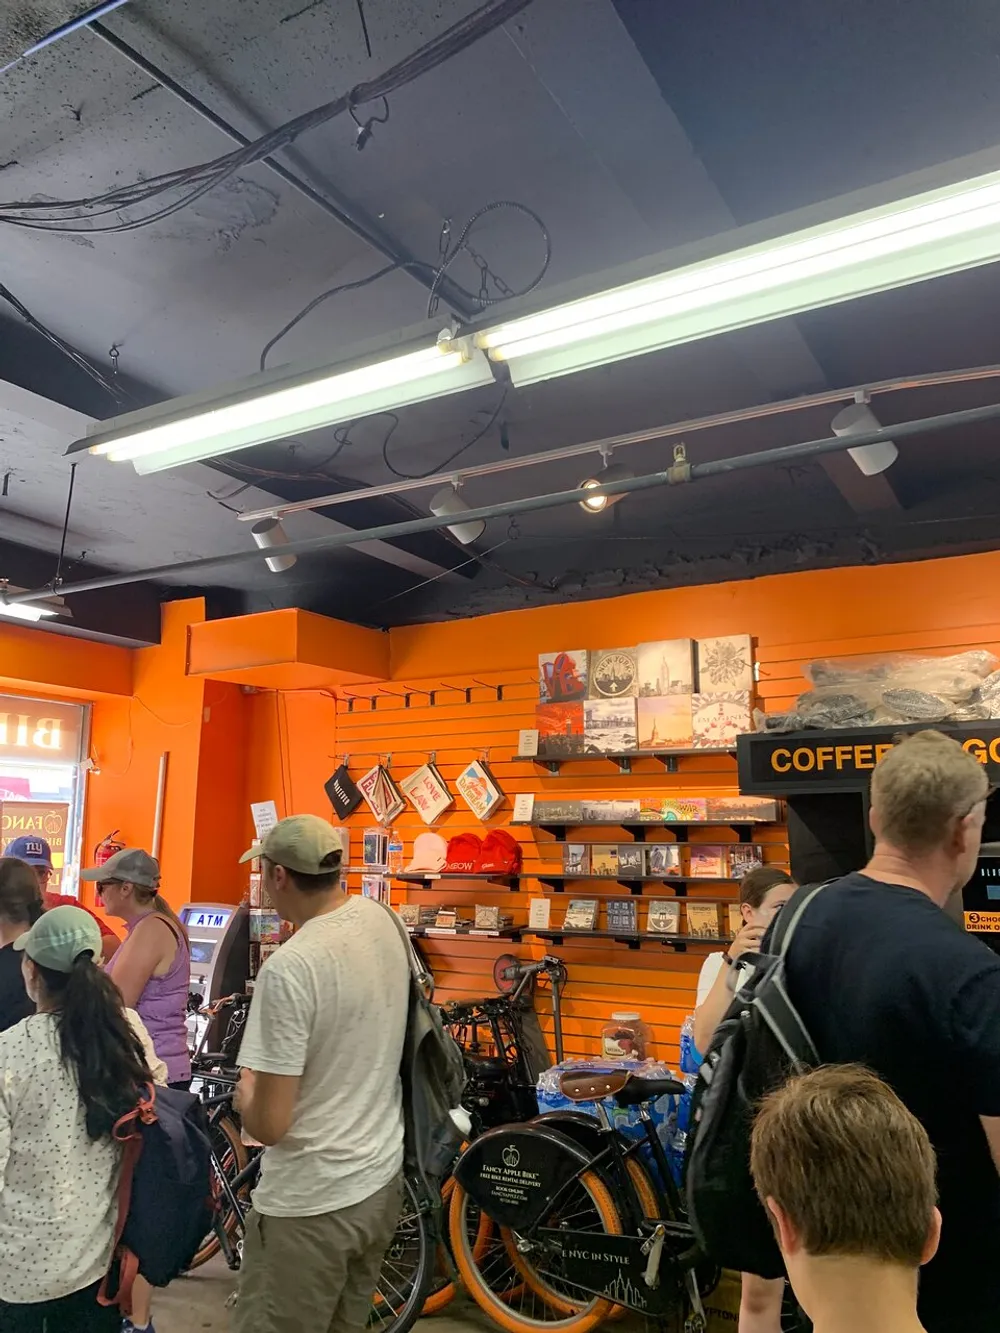 The image depicts a group of customers inside a store with bright orange shelves filled with merchandise and several bicycles parked amongst the shoppers suggesting a casual and possibly urban retail setting